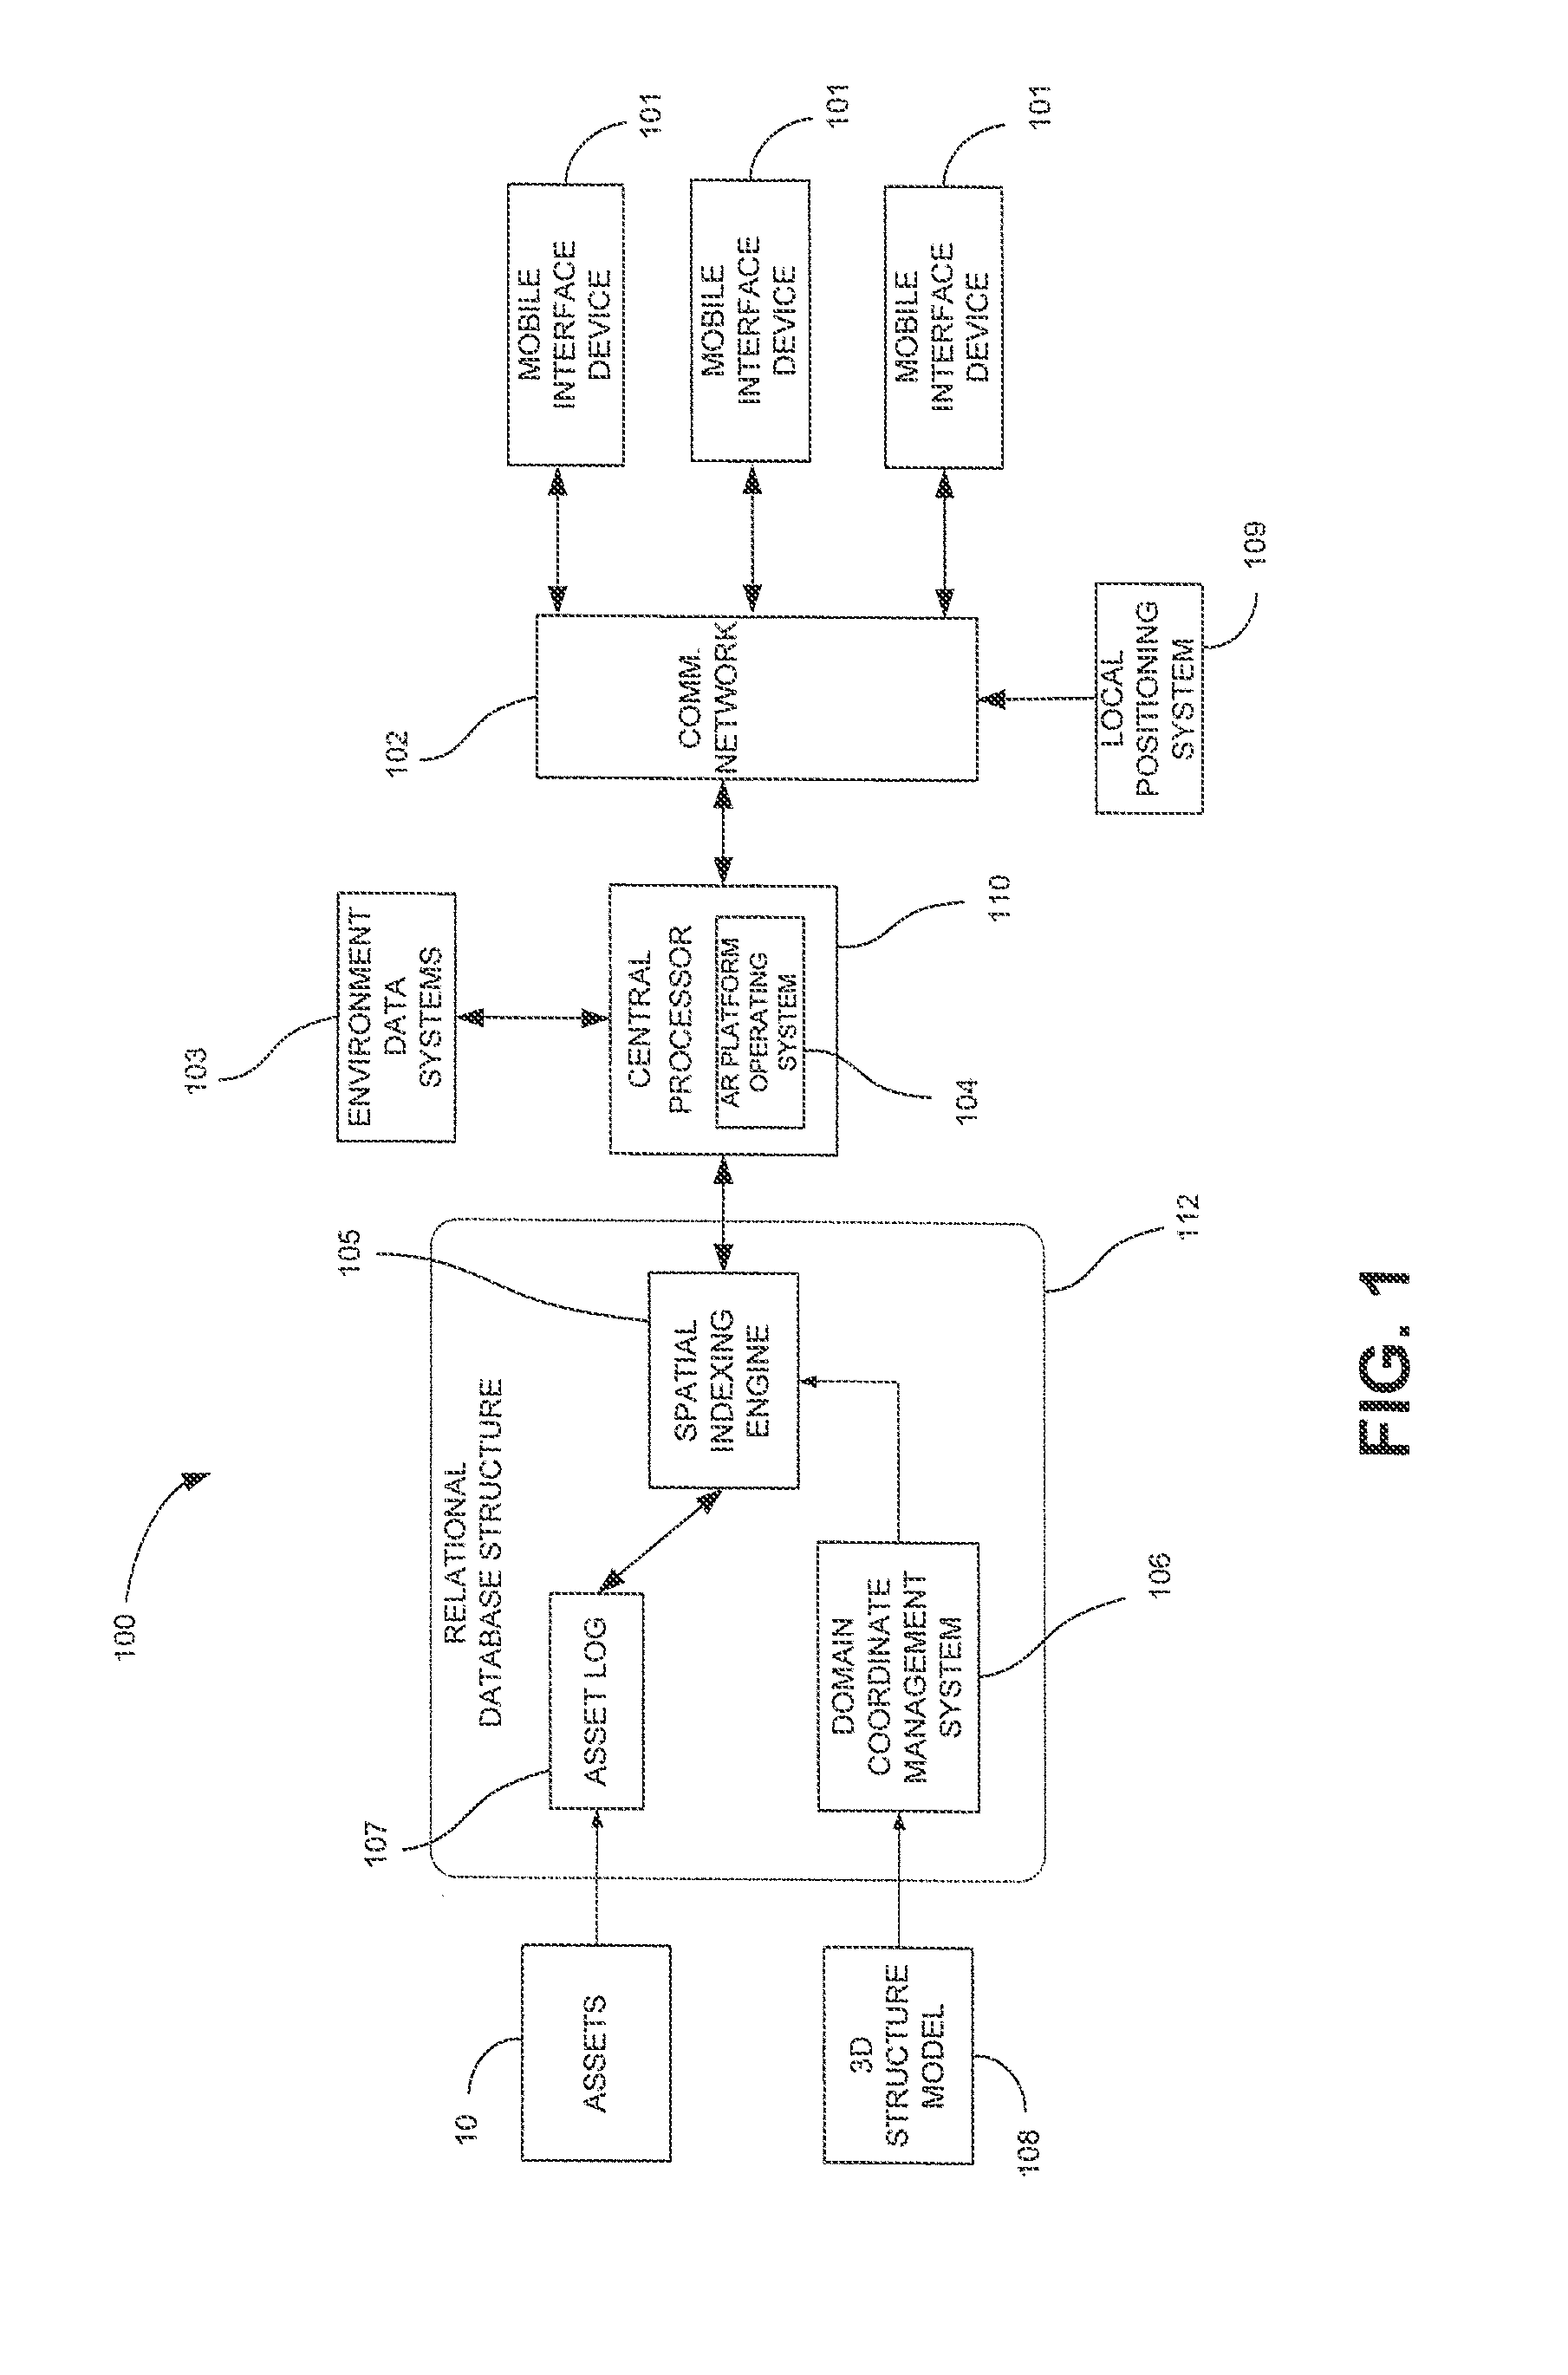 System and Method for Determining and Maintaining Object Location and Status